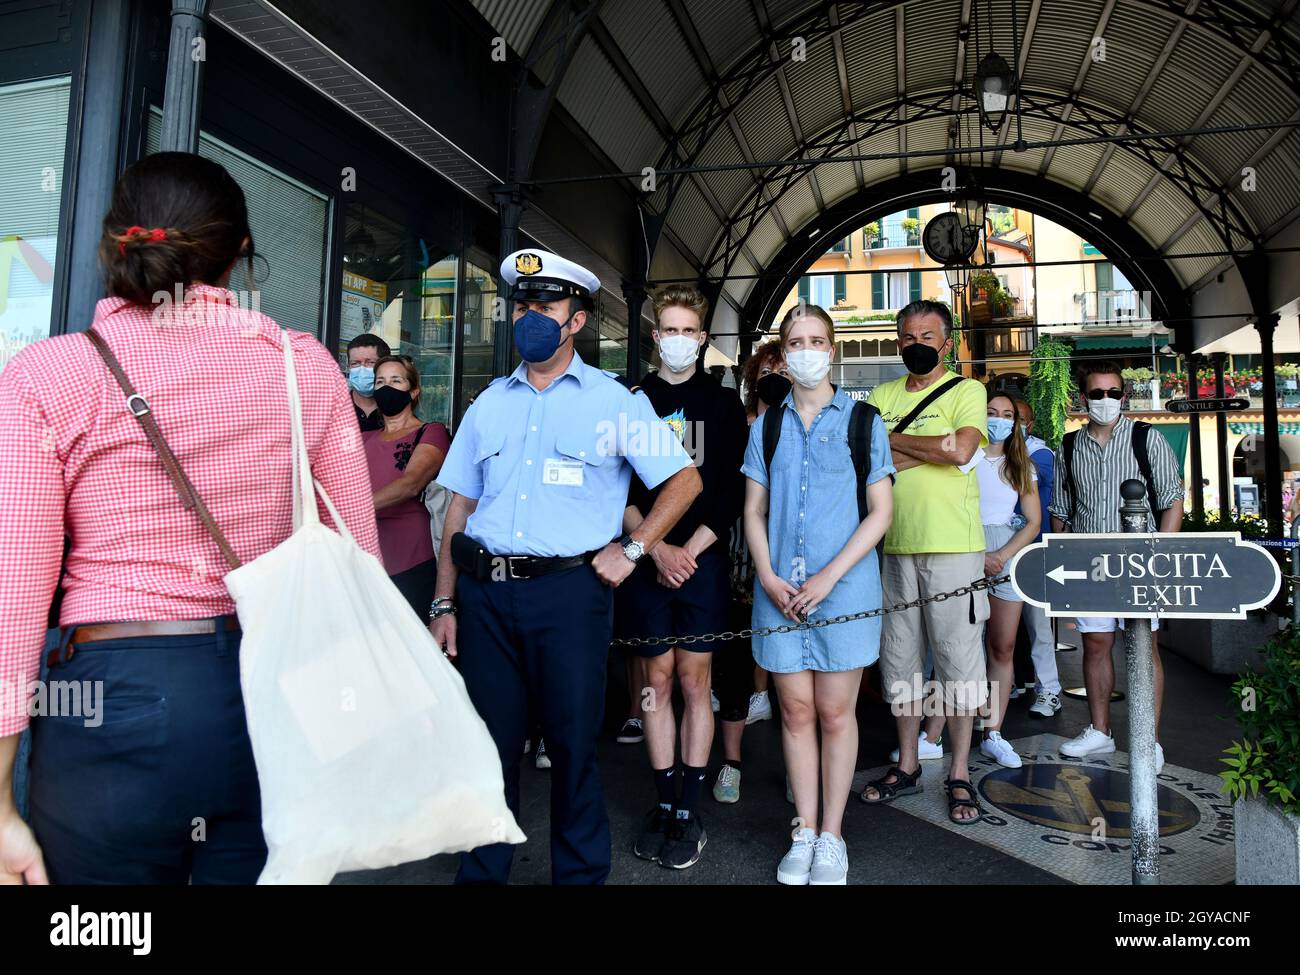 Passengers wearing Covid 19 pandemic face masks as they wait to board boat on Lake Como, Italy Stock Photo